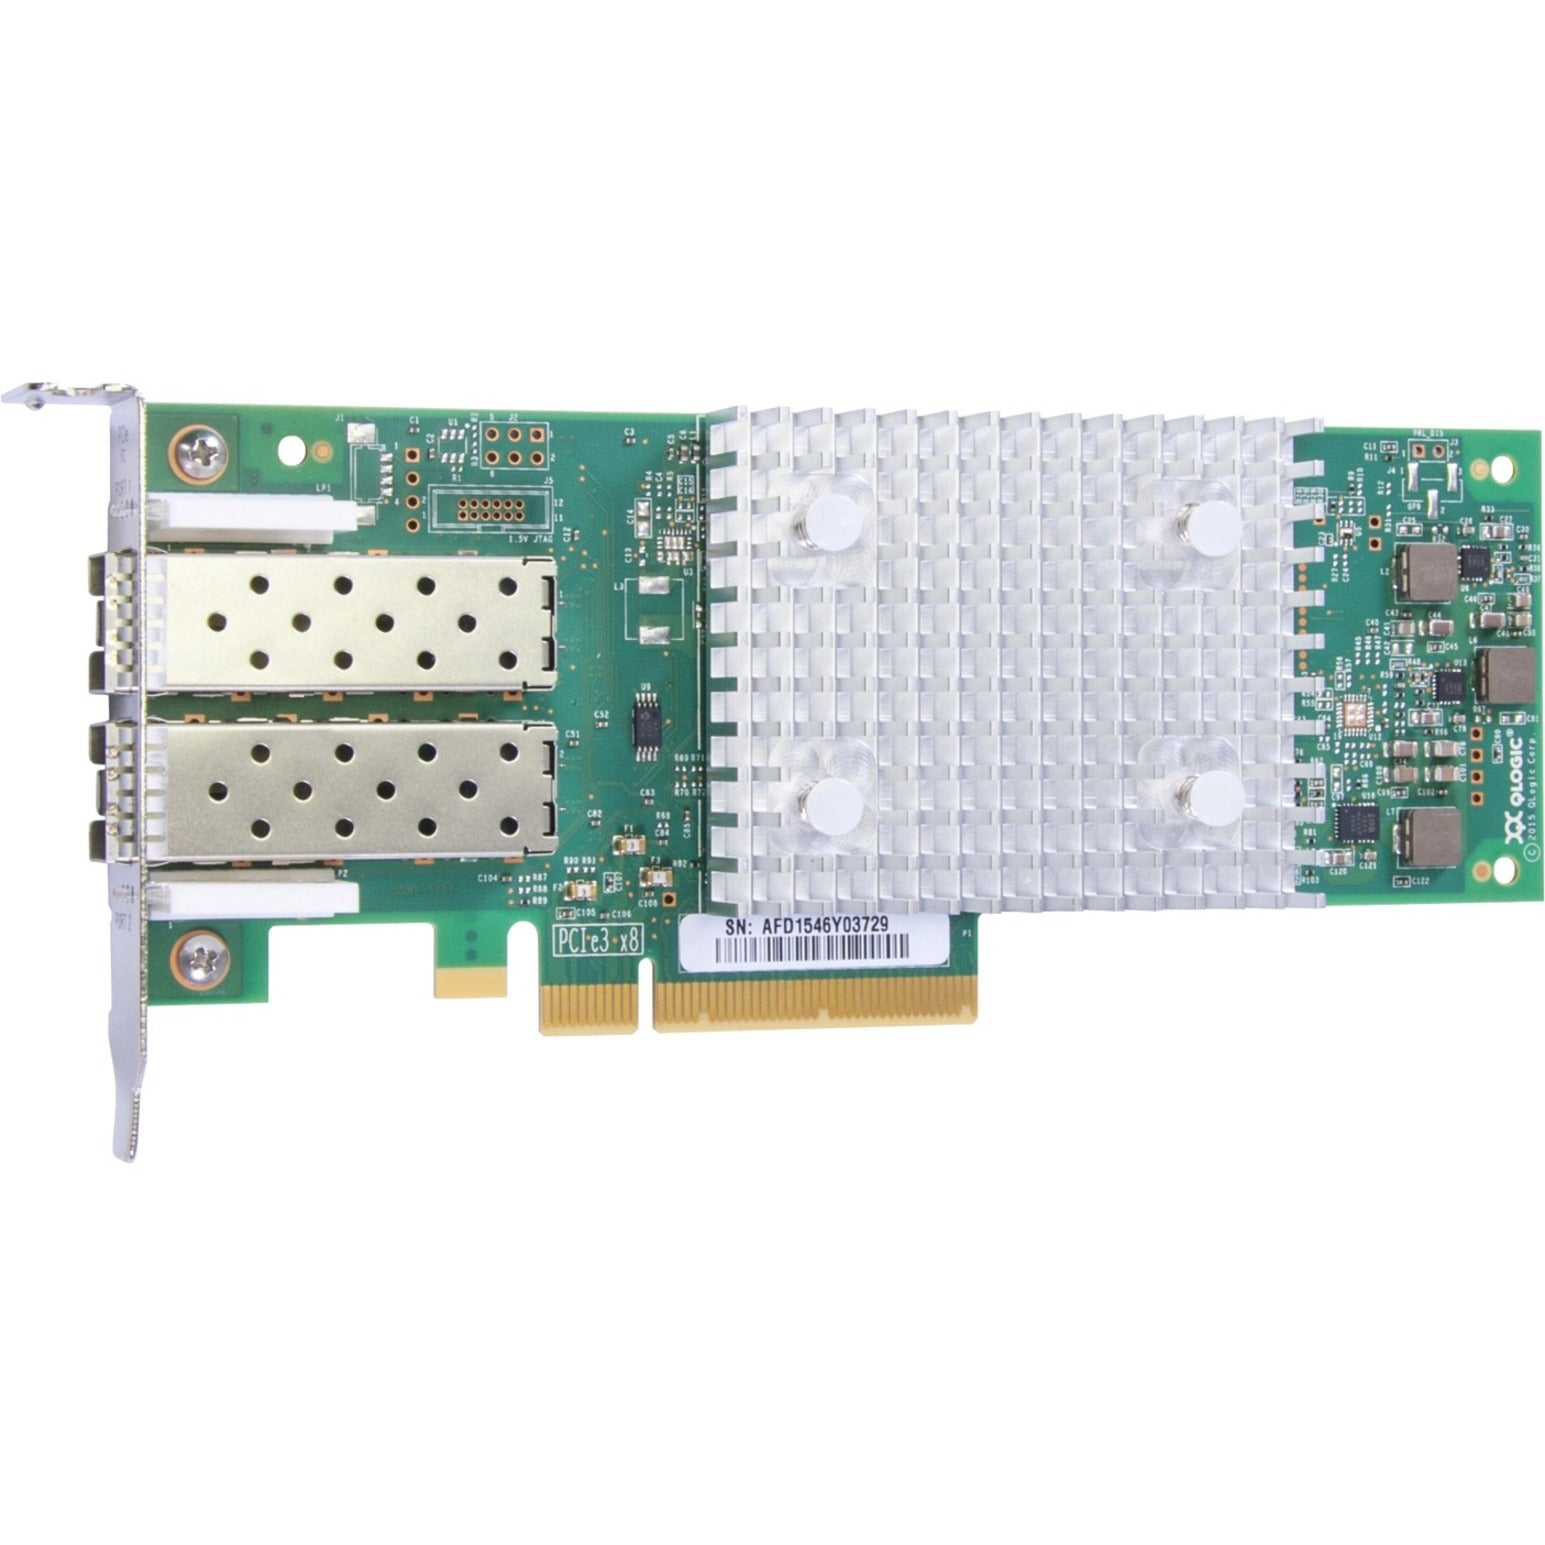 HPE P9M76A StoreFabric SN1600Q 32Gb Dual Port FC HBA, 2 x 32 Gbps SFP+ Transceiver, Low-profile Bracket [Discontinued]